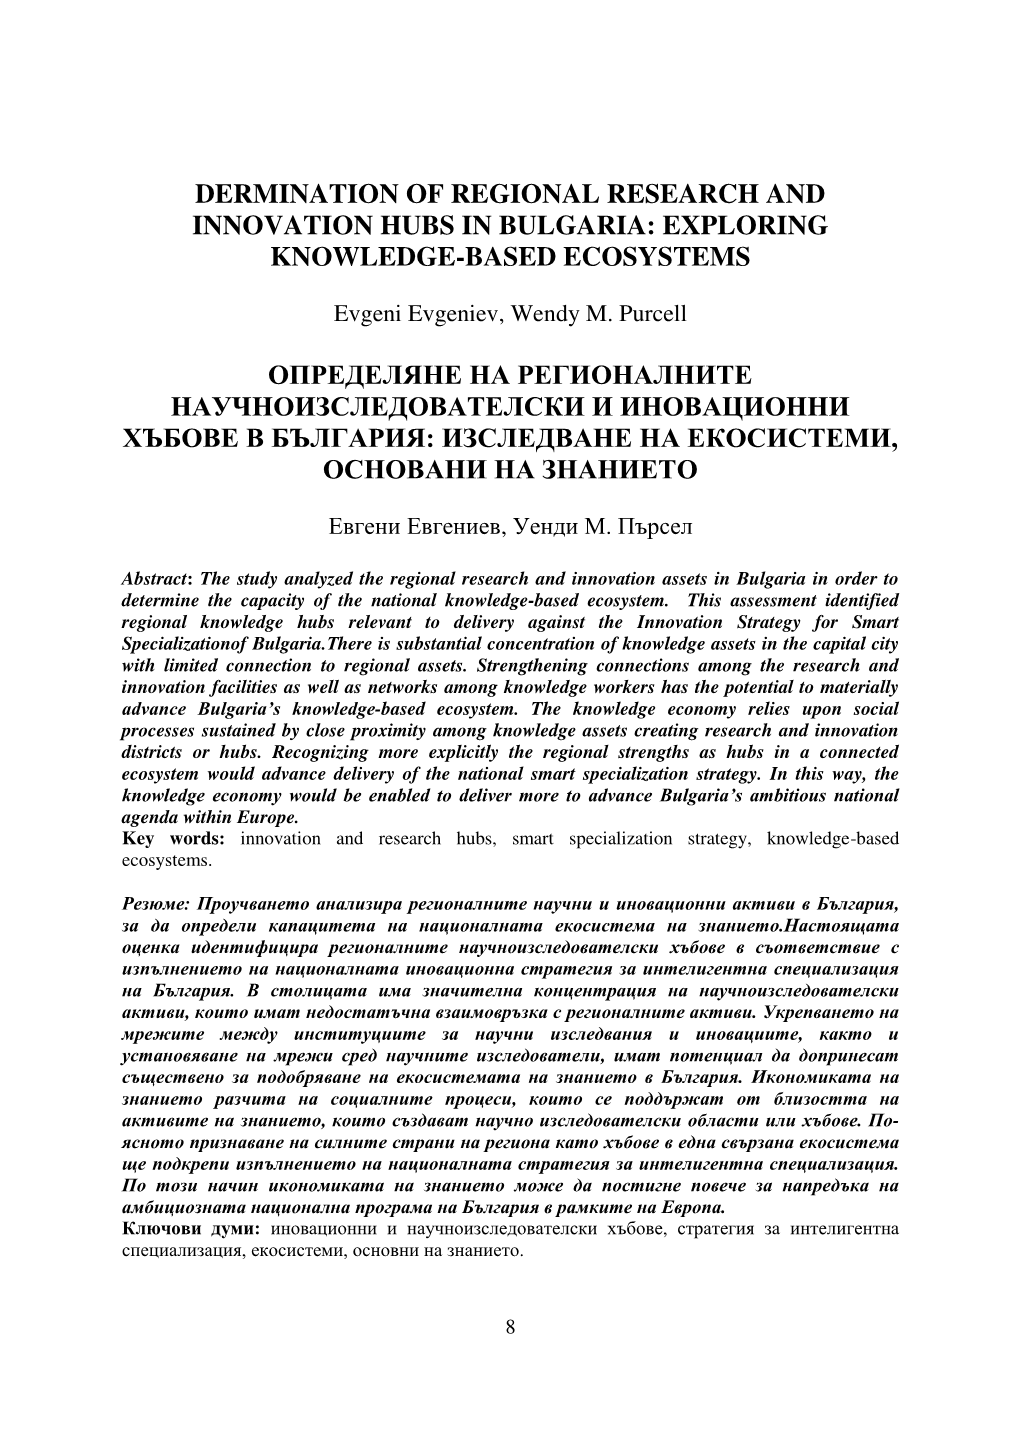 Dermination of Regional Research and Innovation Hubs in Bulgaria: Exploring Knowledge-Based Ecosystems